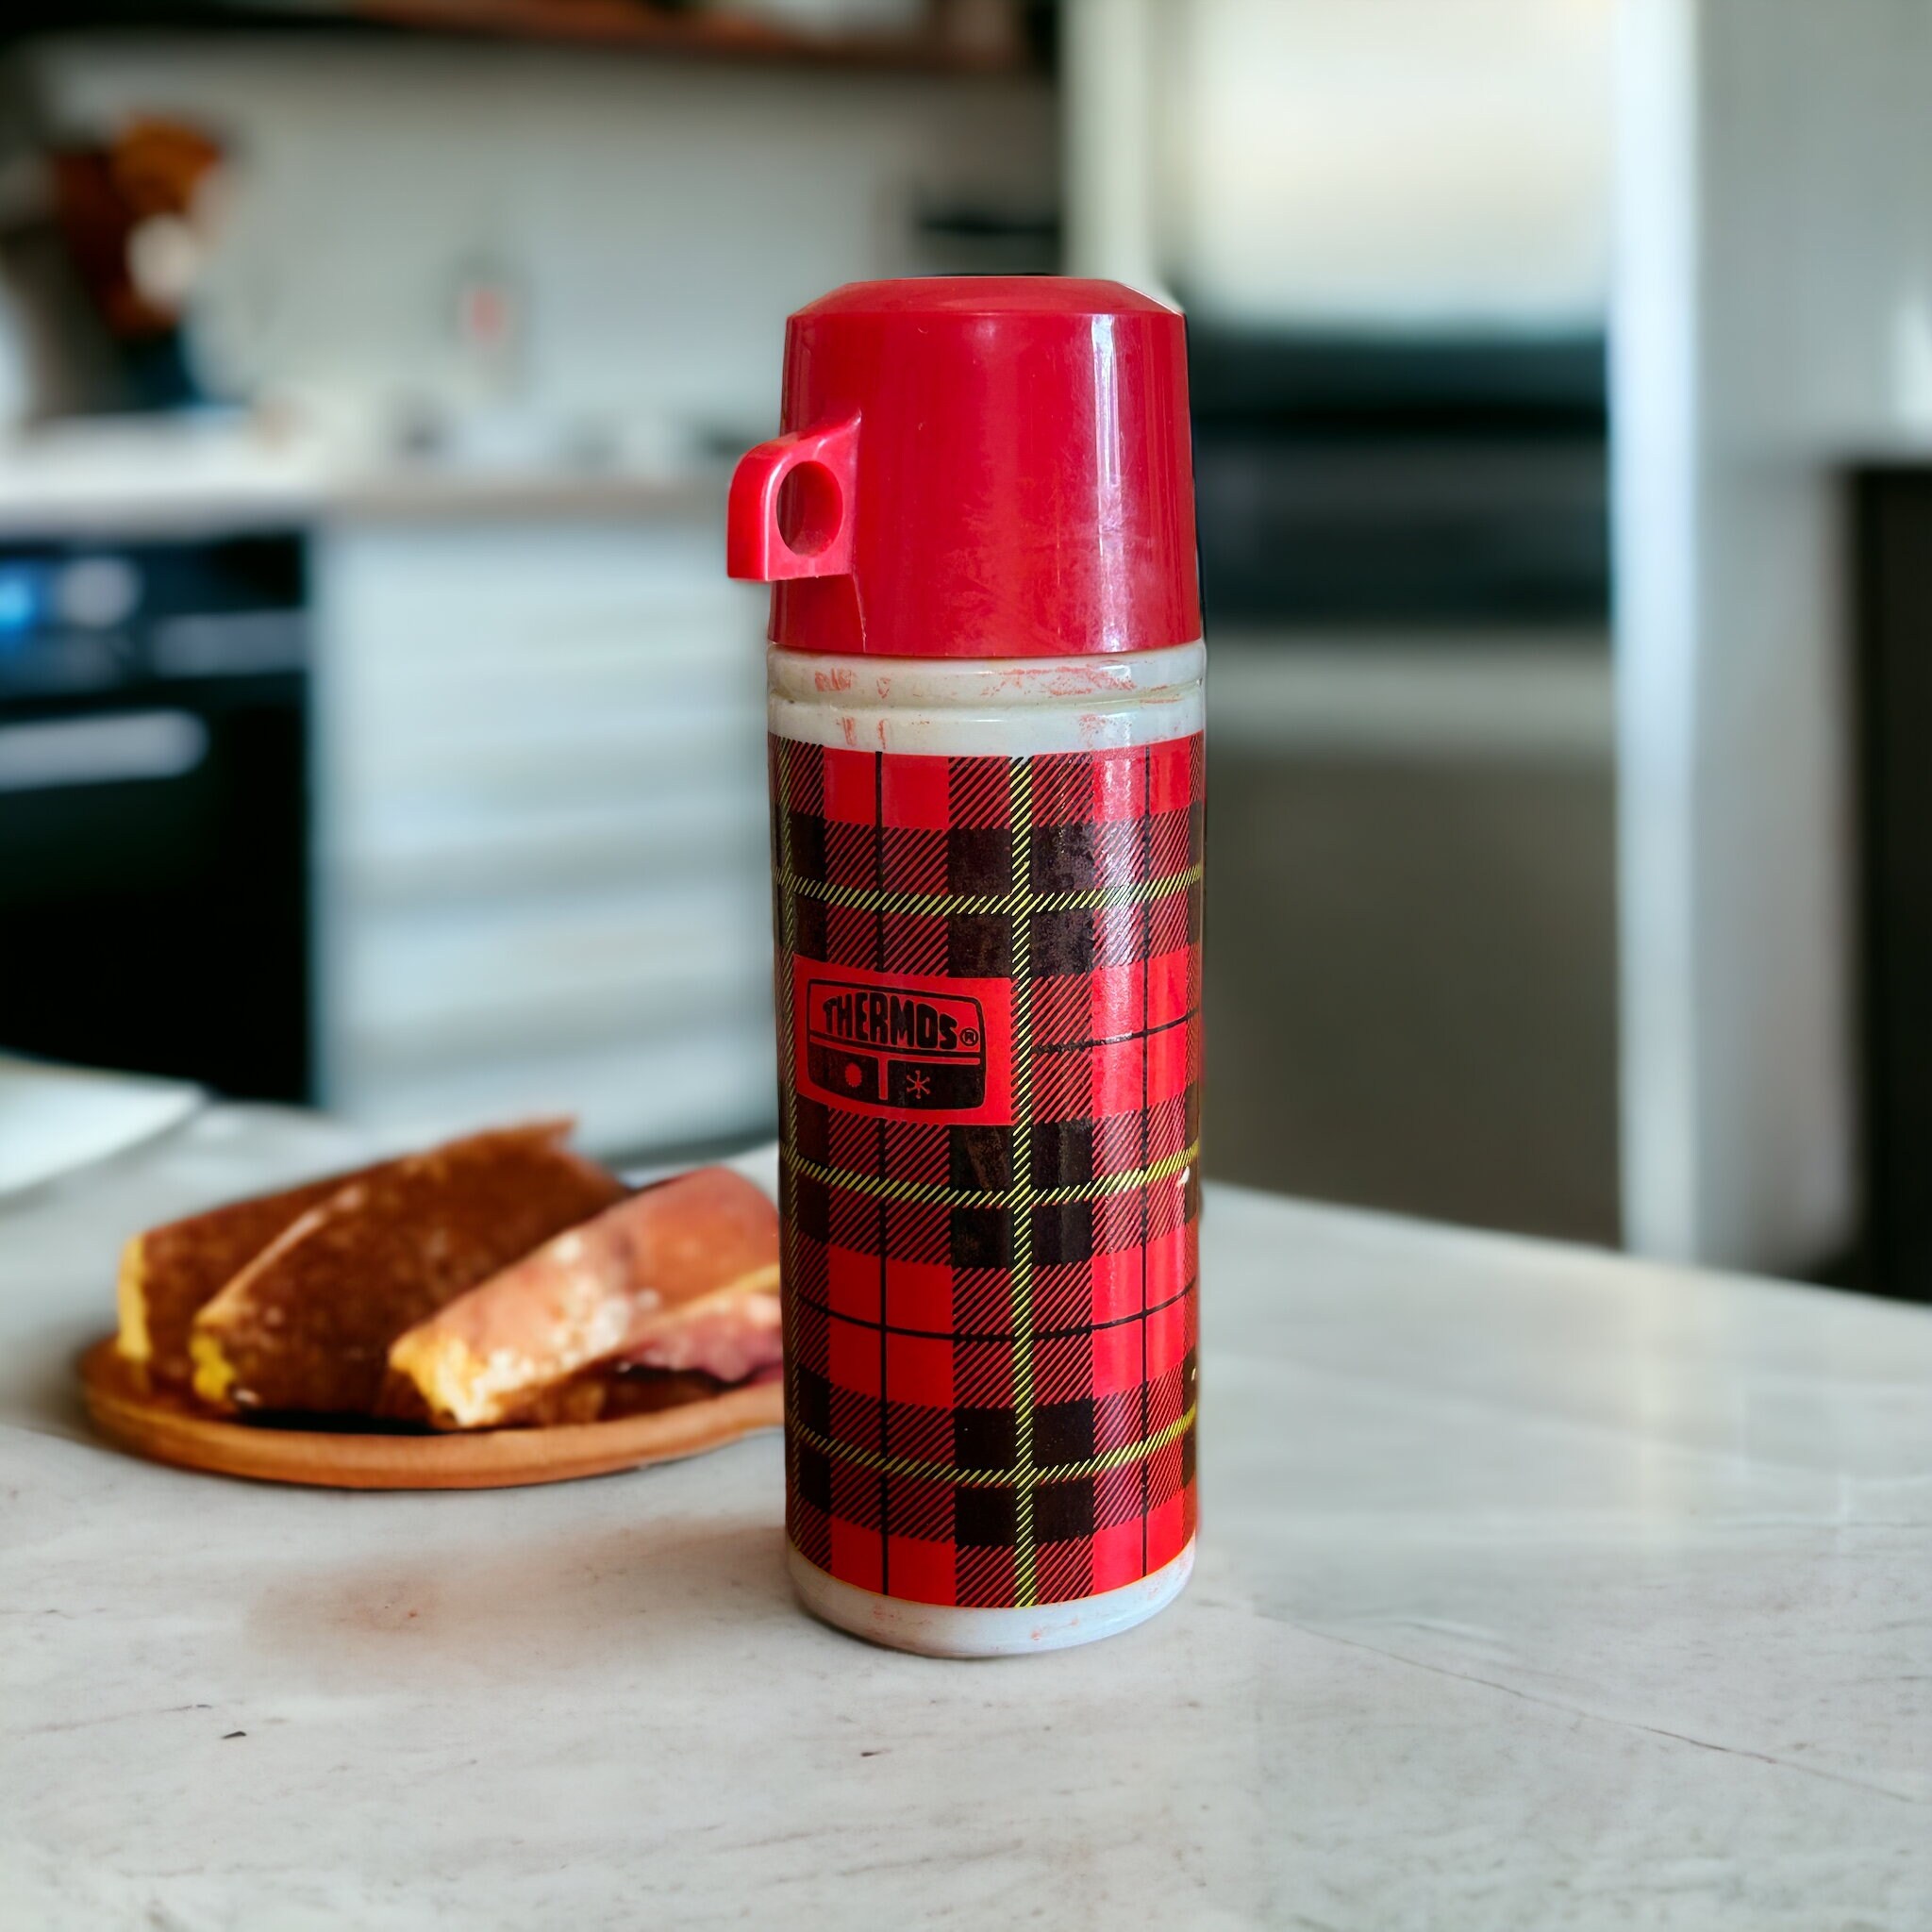 Avon red plaid thermos canister collectible for Sale in Eatonville